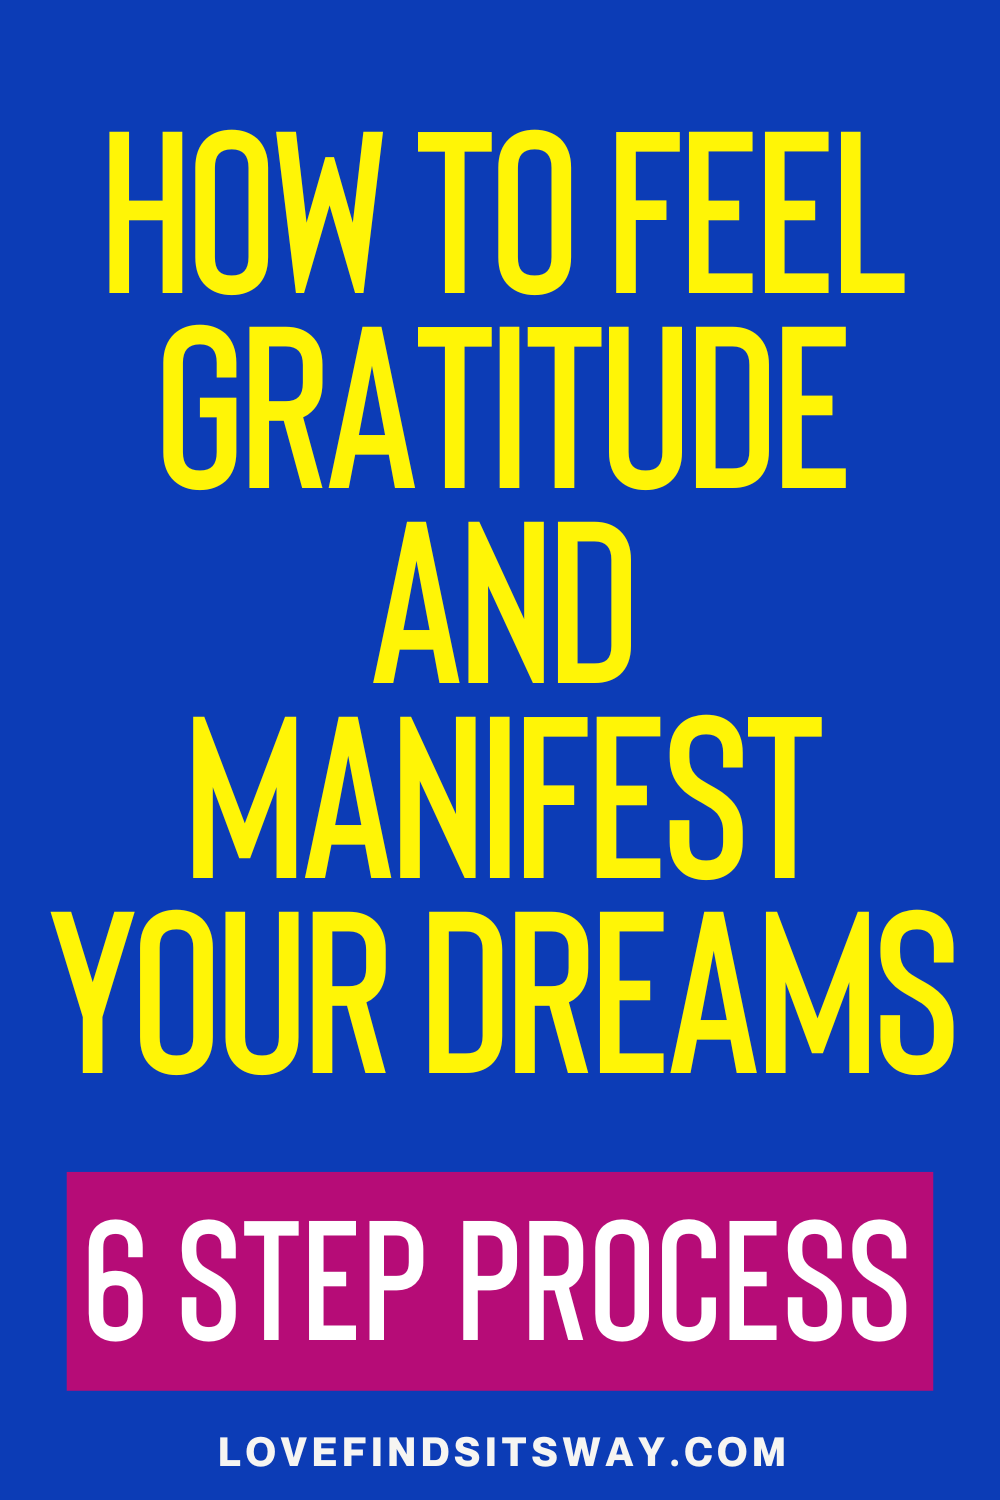 How-To-Feel-Gratitude-6-Steps-to-Manifest-Your-Dream